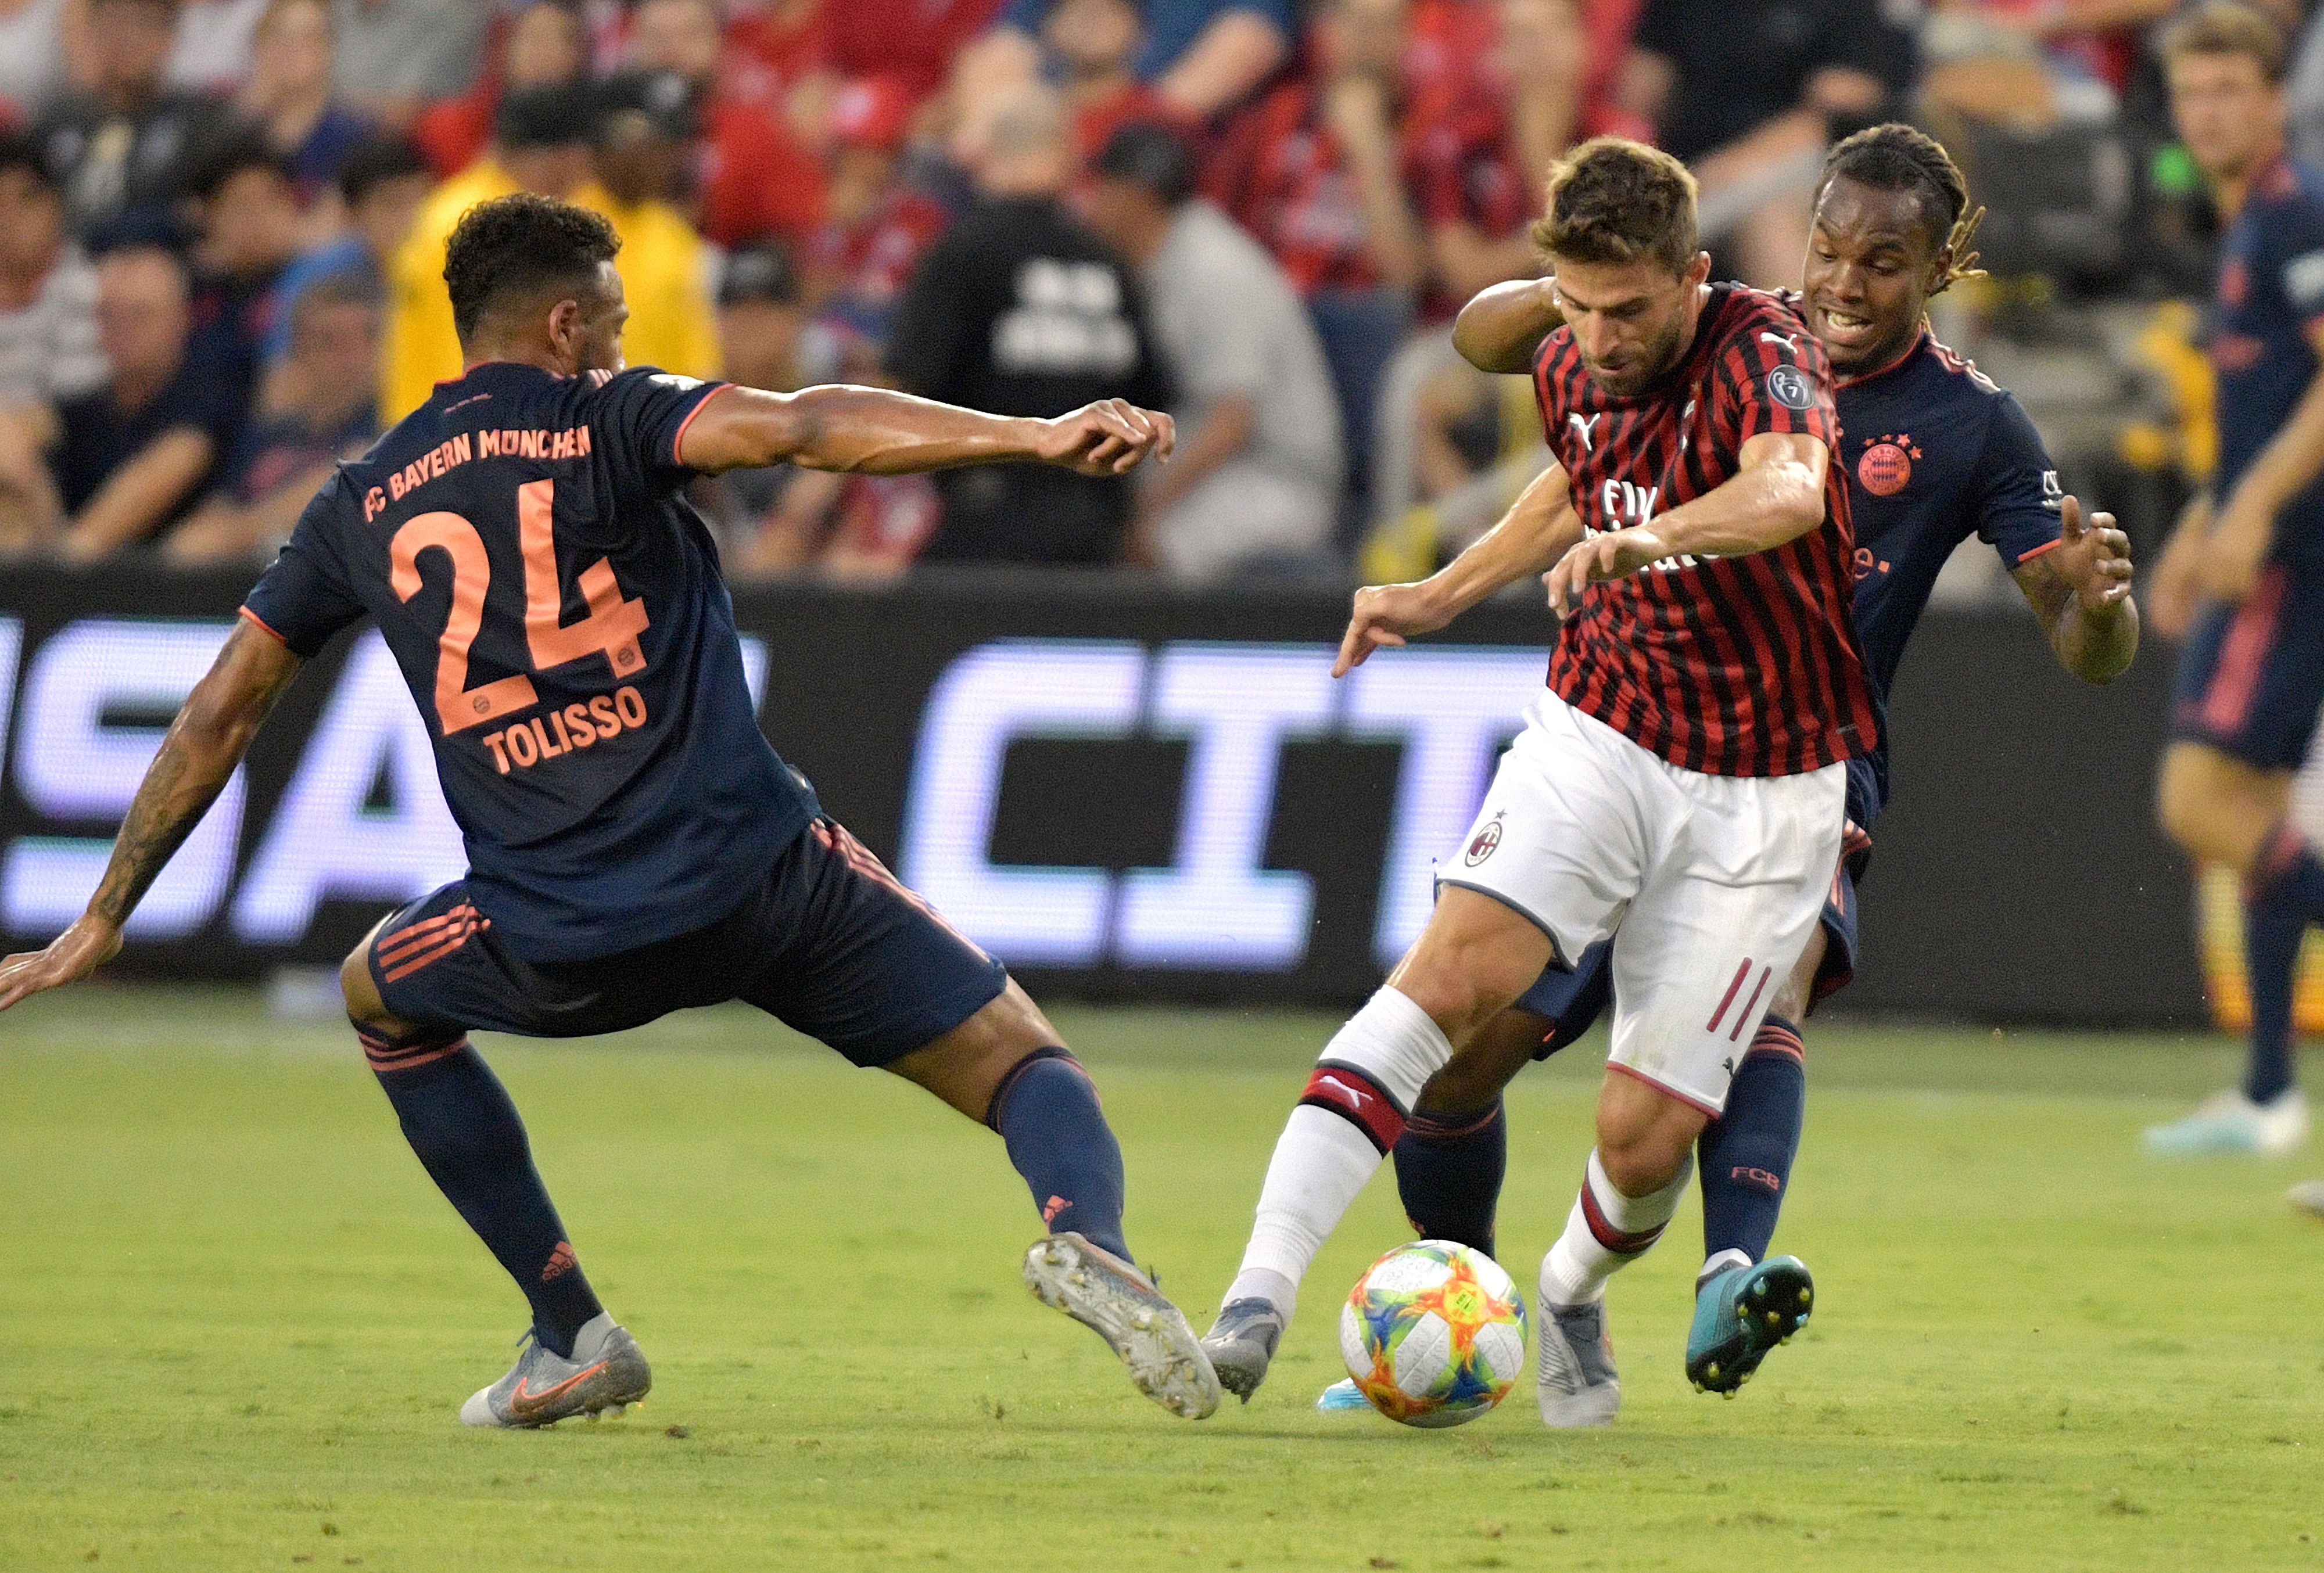 Bayern Munich's French midfielder Corentin Tolisso (L) and Portuguese midfileder Renato Sanches (R) vie for the ball with AC Milan's Italian foward Fabio Borini (C) during their International Champions Cup football match between Fc Bayern and AC Milan at Children's Mercy Park in Kansas City, Missouri on July 23, 2019. (Photo by Tim VIZER / AFP) (Photo credit should read TIM VIZER/AFP/Getty Images)